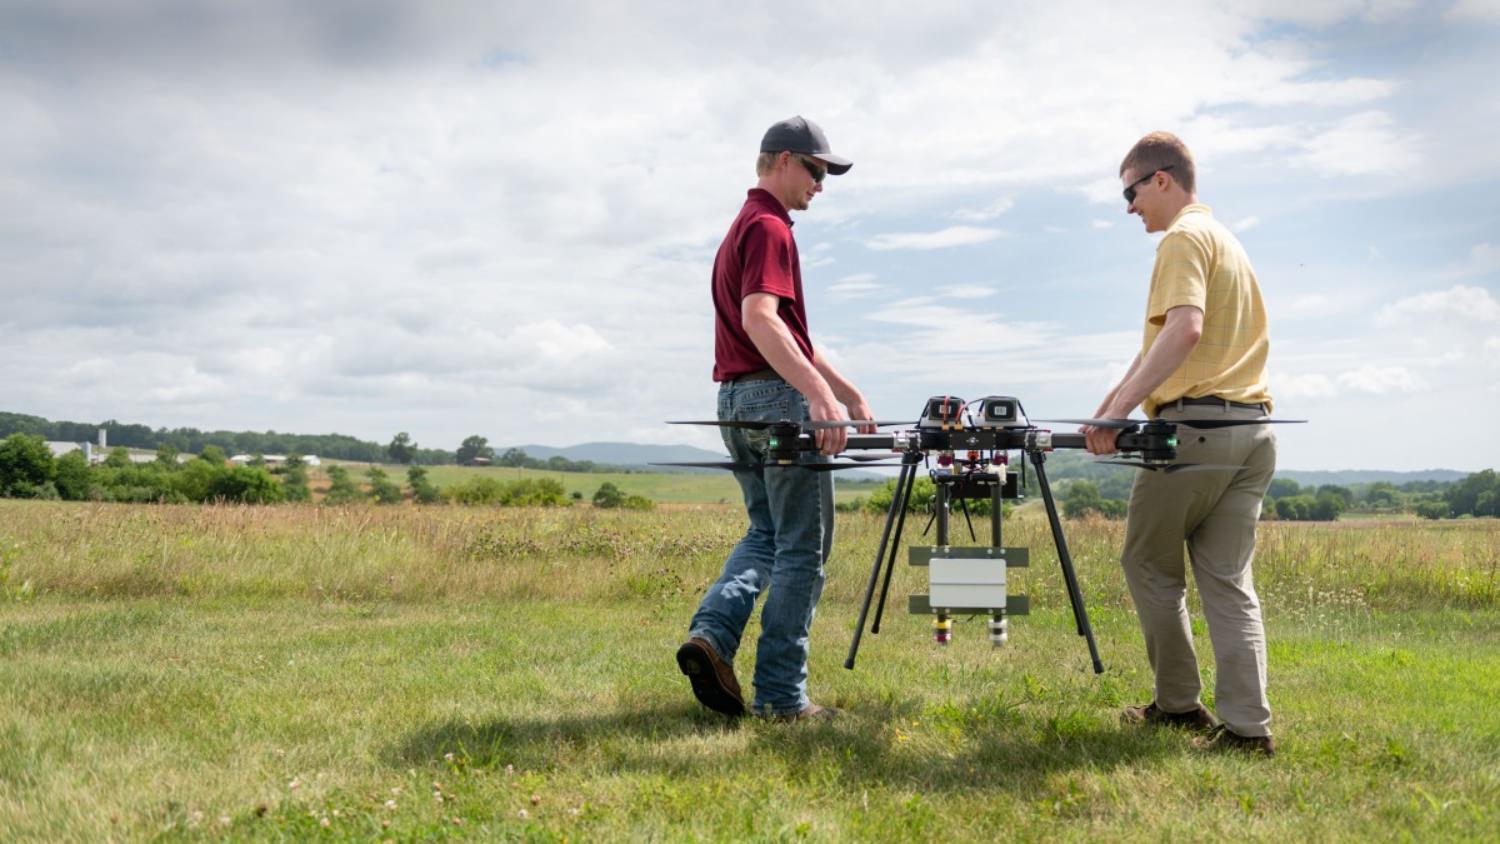 Drones with 'detect and avoid' tech tested in Blacksburg, Virginia